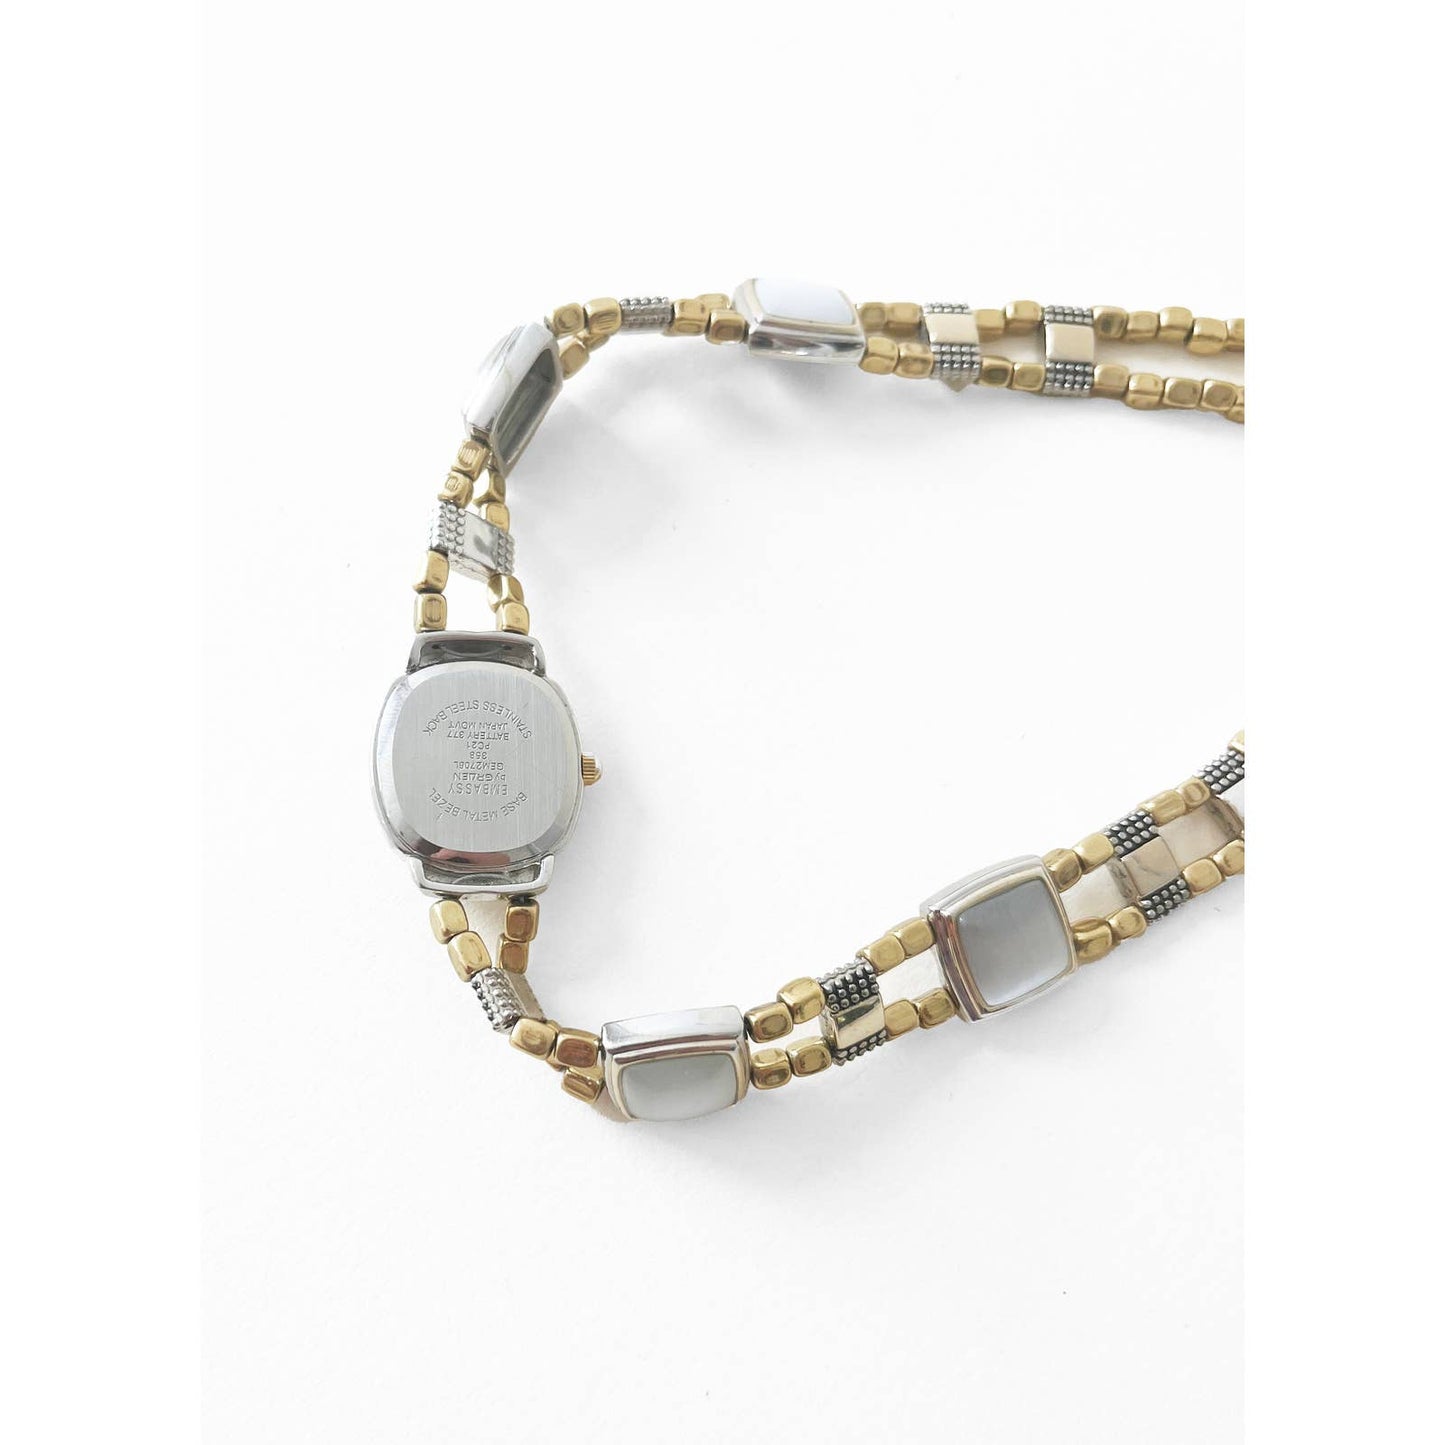 Watch Necklace | Vintage One of a Kind Watch Choker with Brass and Silver Details